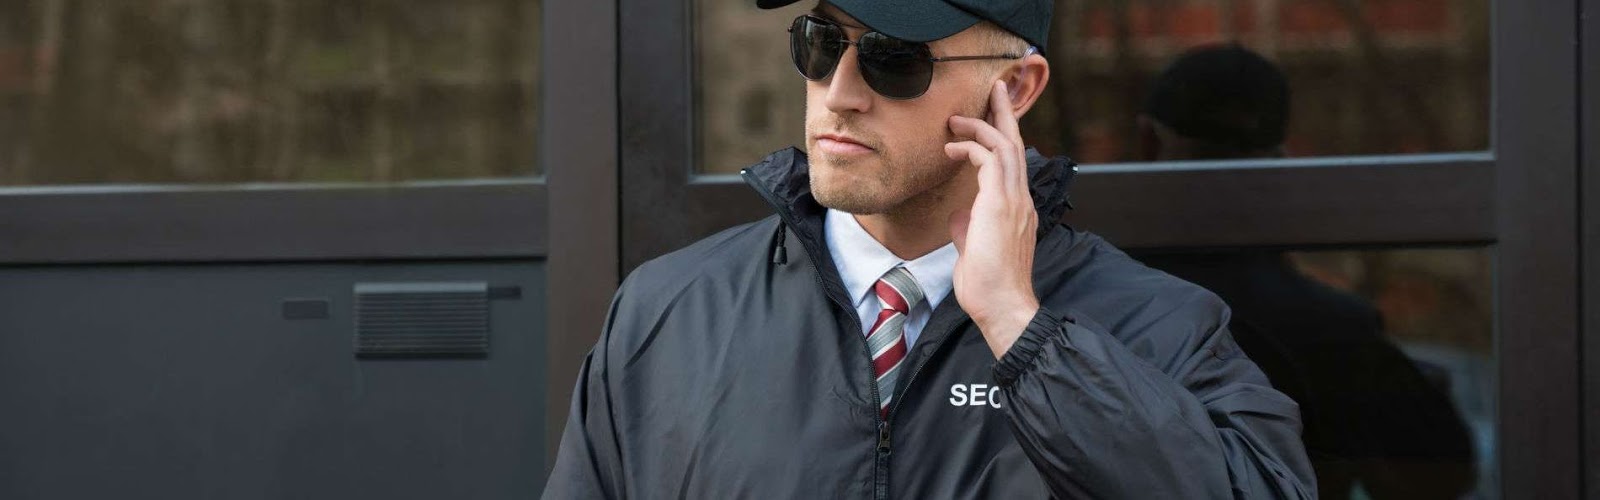 Security Guard Service in Greater Noida and India